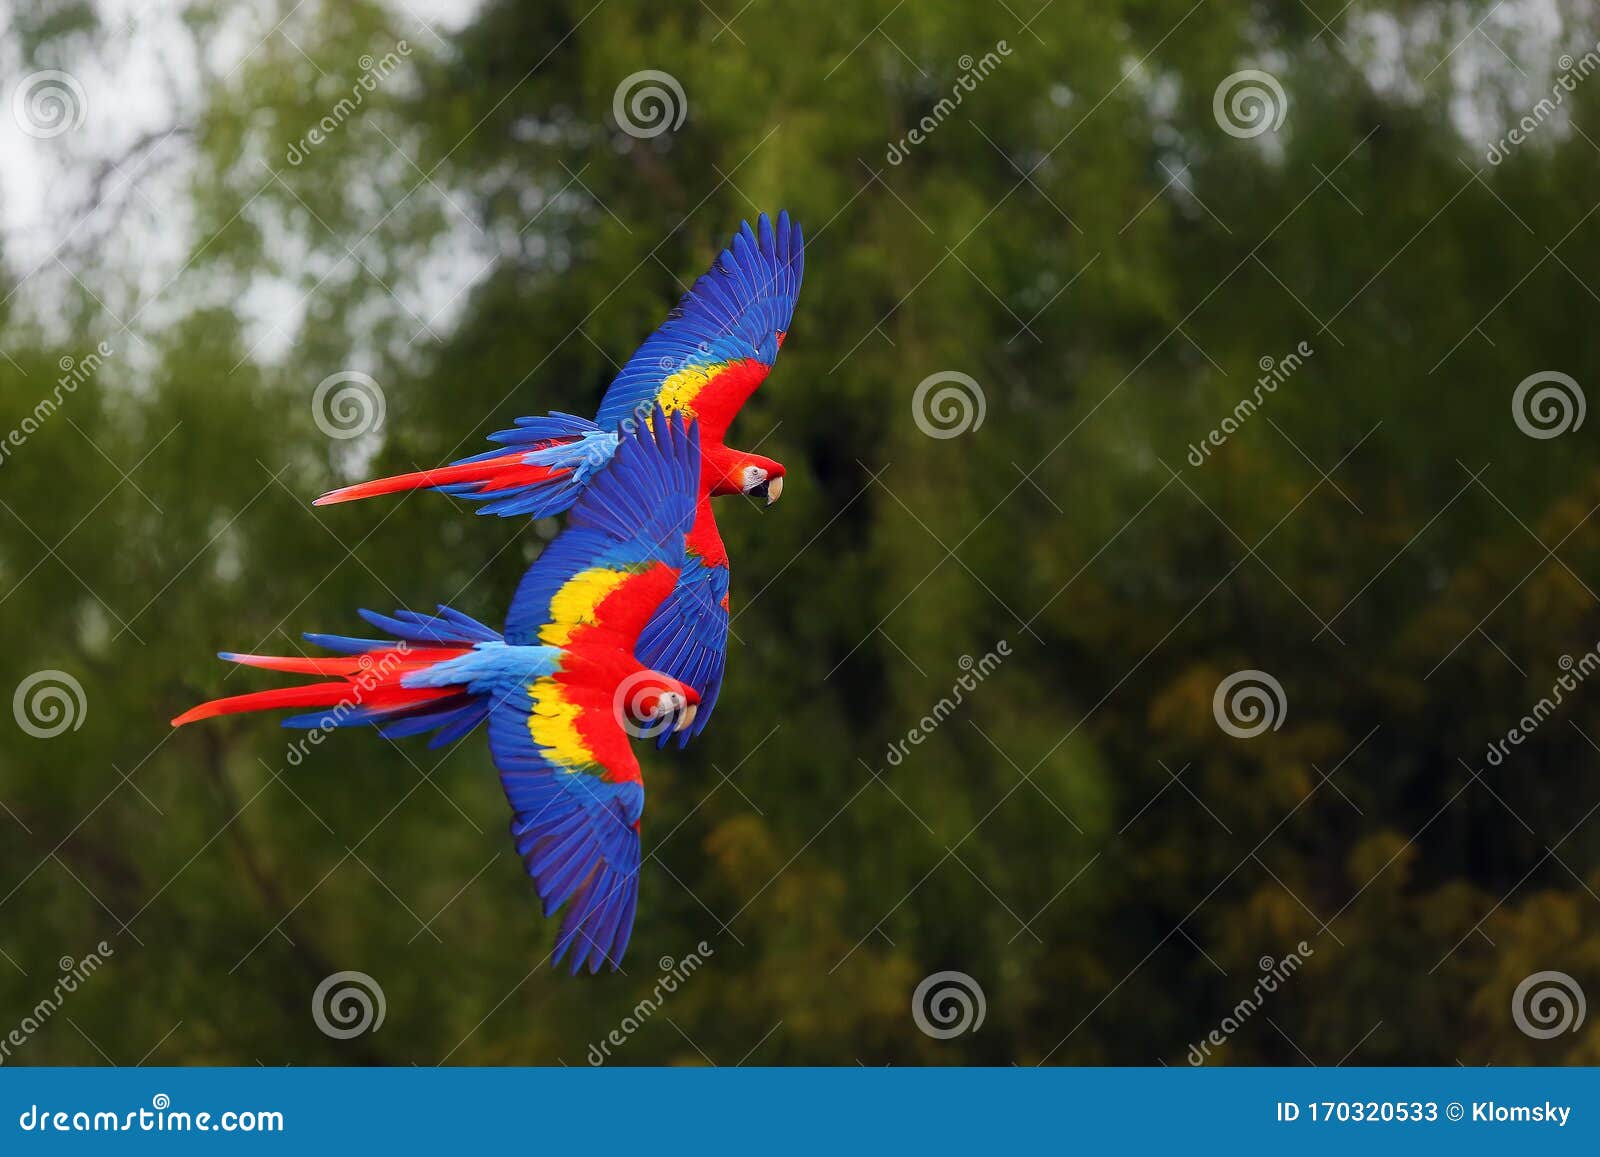 the scarlet macaw ara macao flying through forest with green background.